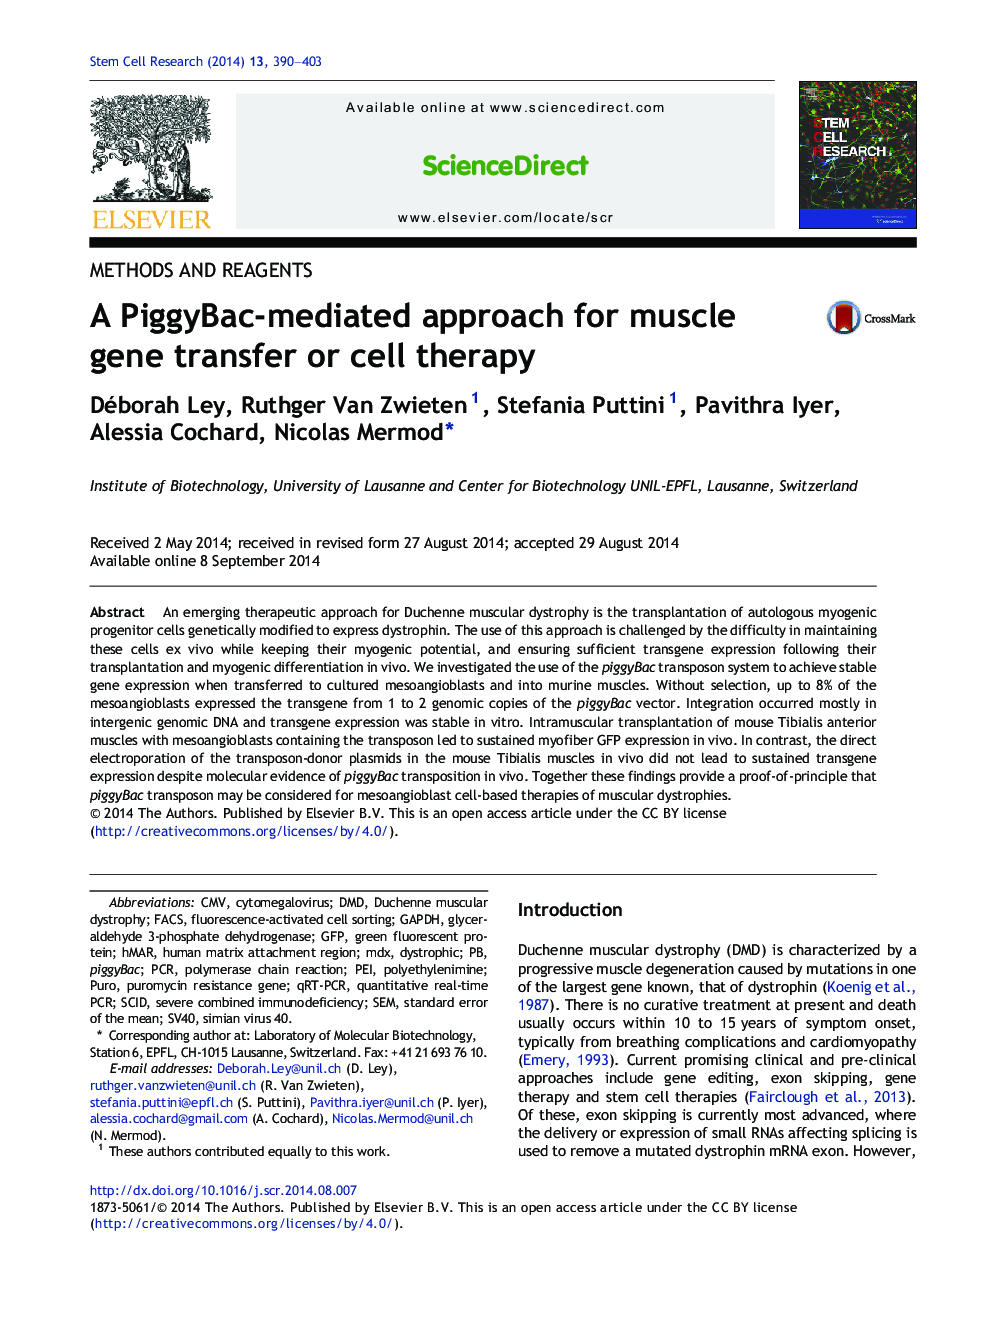 A PiggyBac-mediated approach for muscle gene transfer or cell therapy